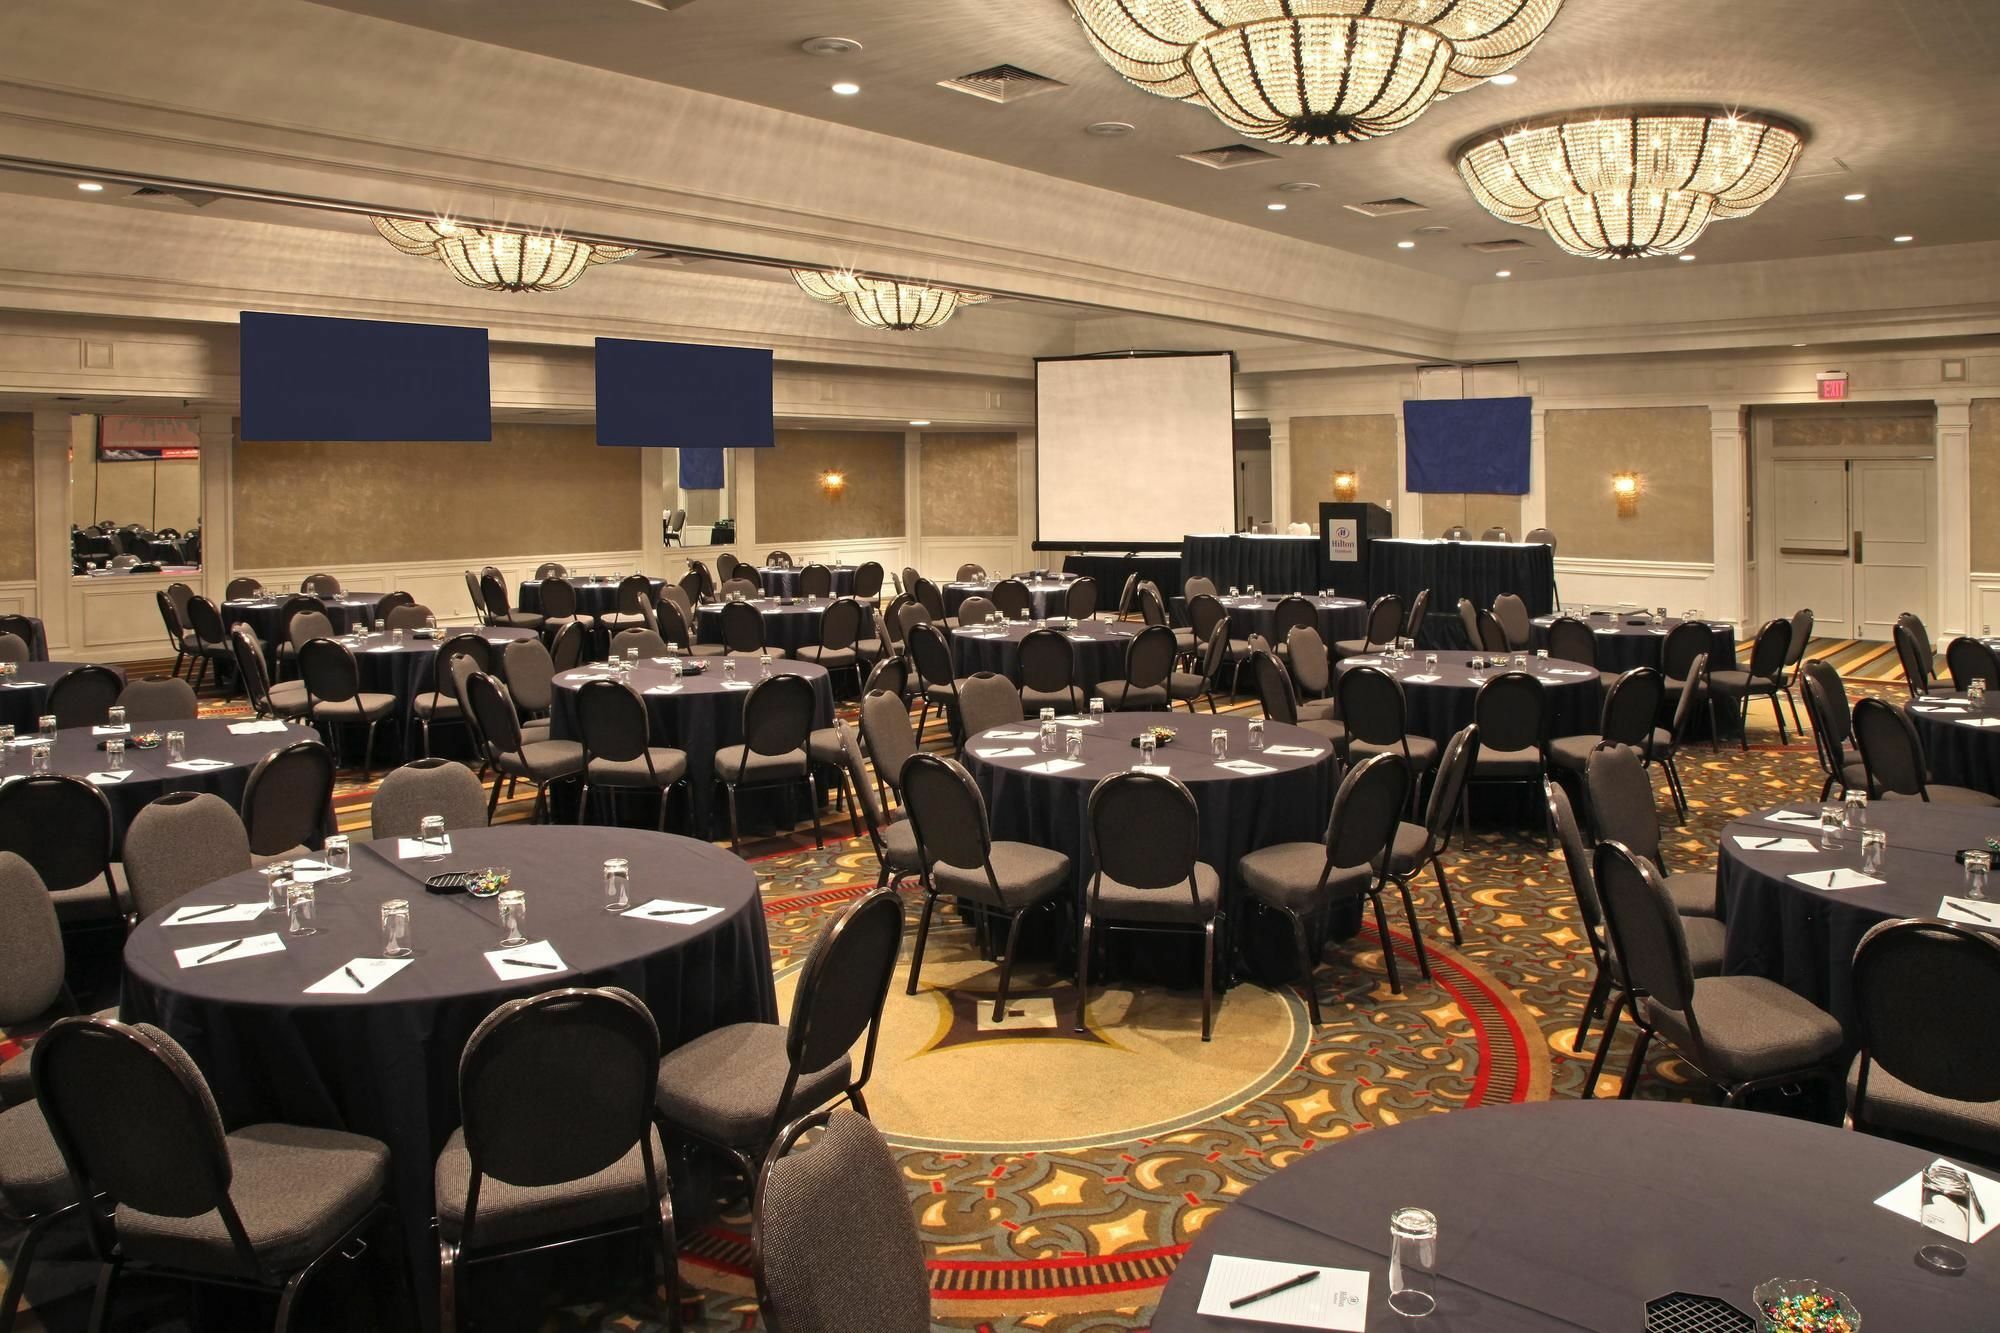 Doubletree By Hilton Hartford Downtown Hotel Facilities photo